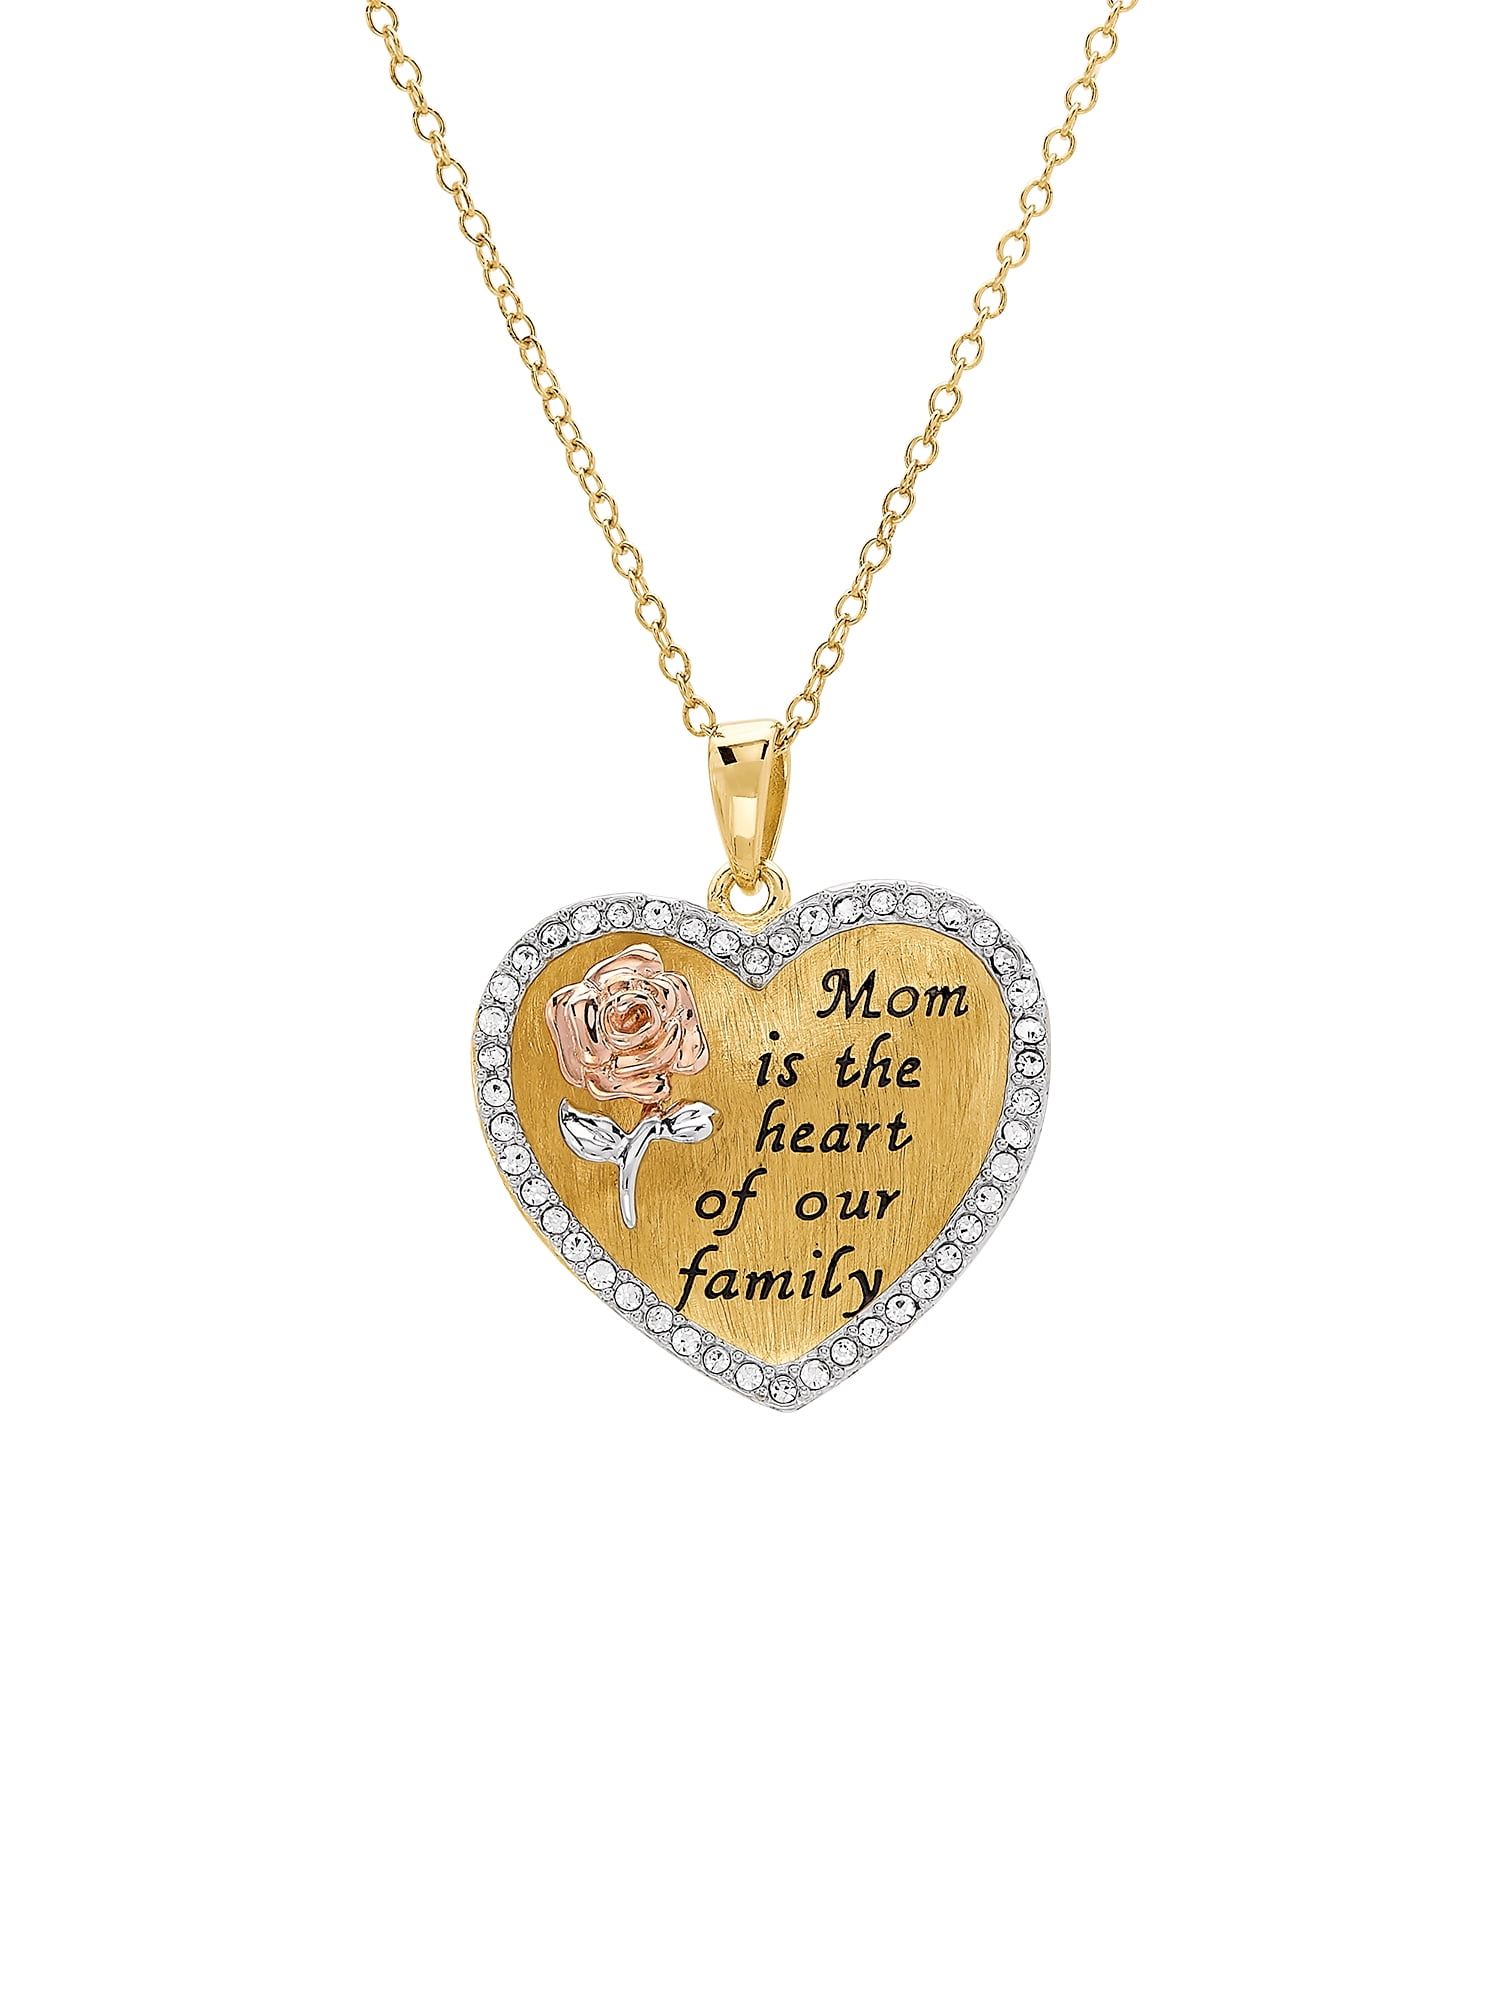 Family Family Girl and Boy Pendant 18k Gold Plated Pendant with 20 Inch Chain